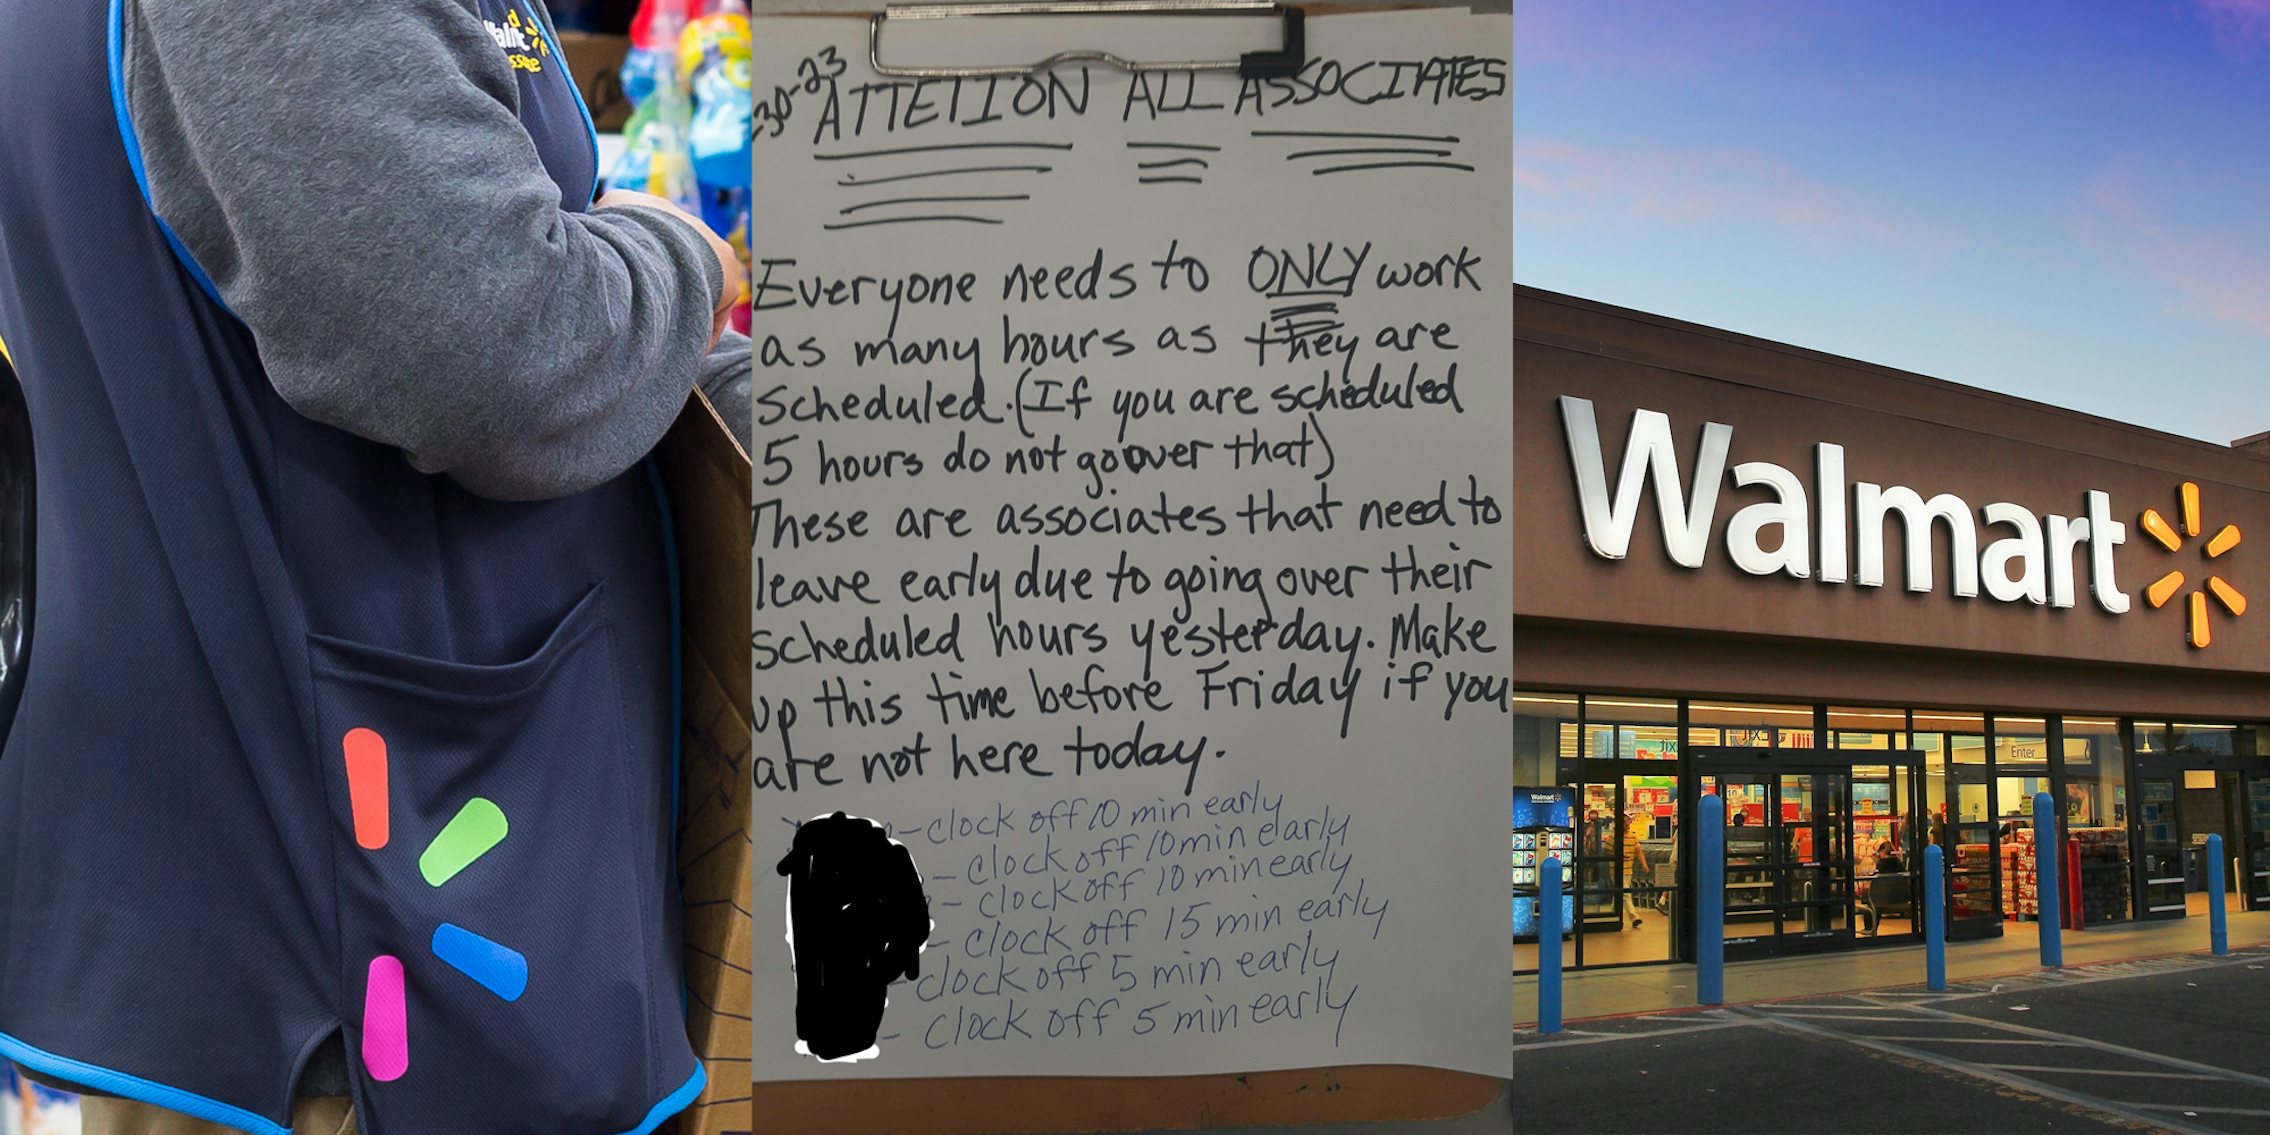 Walmart employee wearing branded vest (l) clipboard with writing 'ATTENTION ALL ASSOCIATES Everyone needs to ONLY work as many hours as they are scheduled...' (c) Walmart building with sign at night (r)